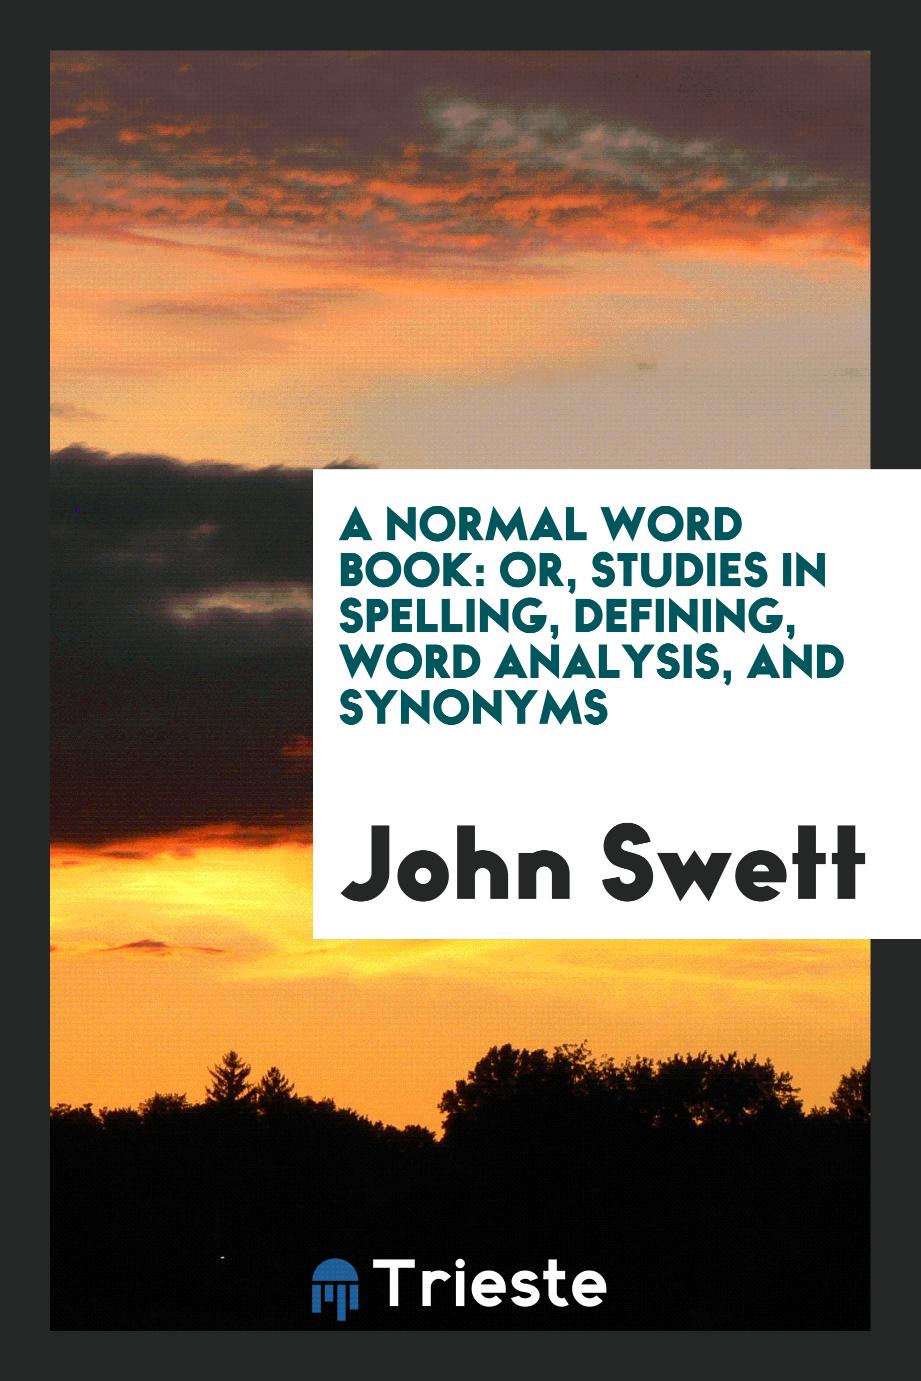 A Normal Word Book: Or, Studies in Spelling, Defining, Word Analysis, and Synonyms